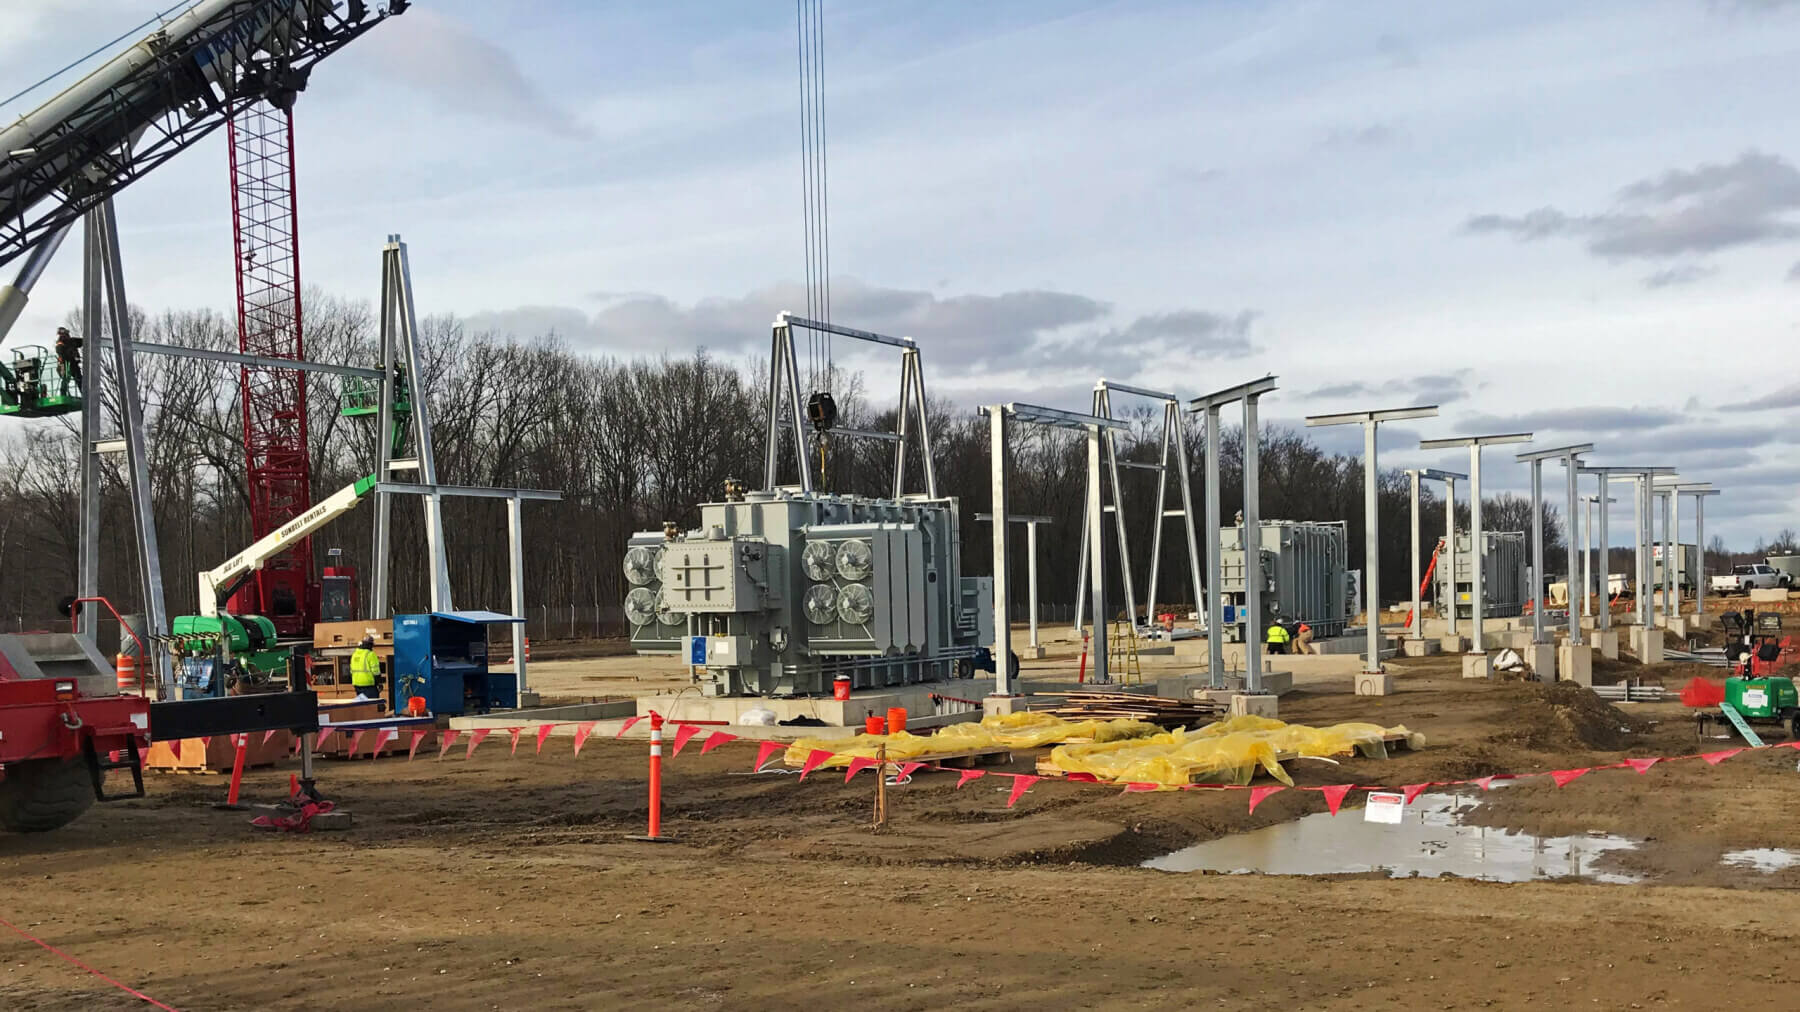 the Ultium Lordstown power substation